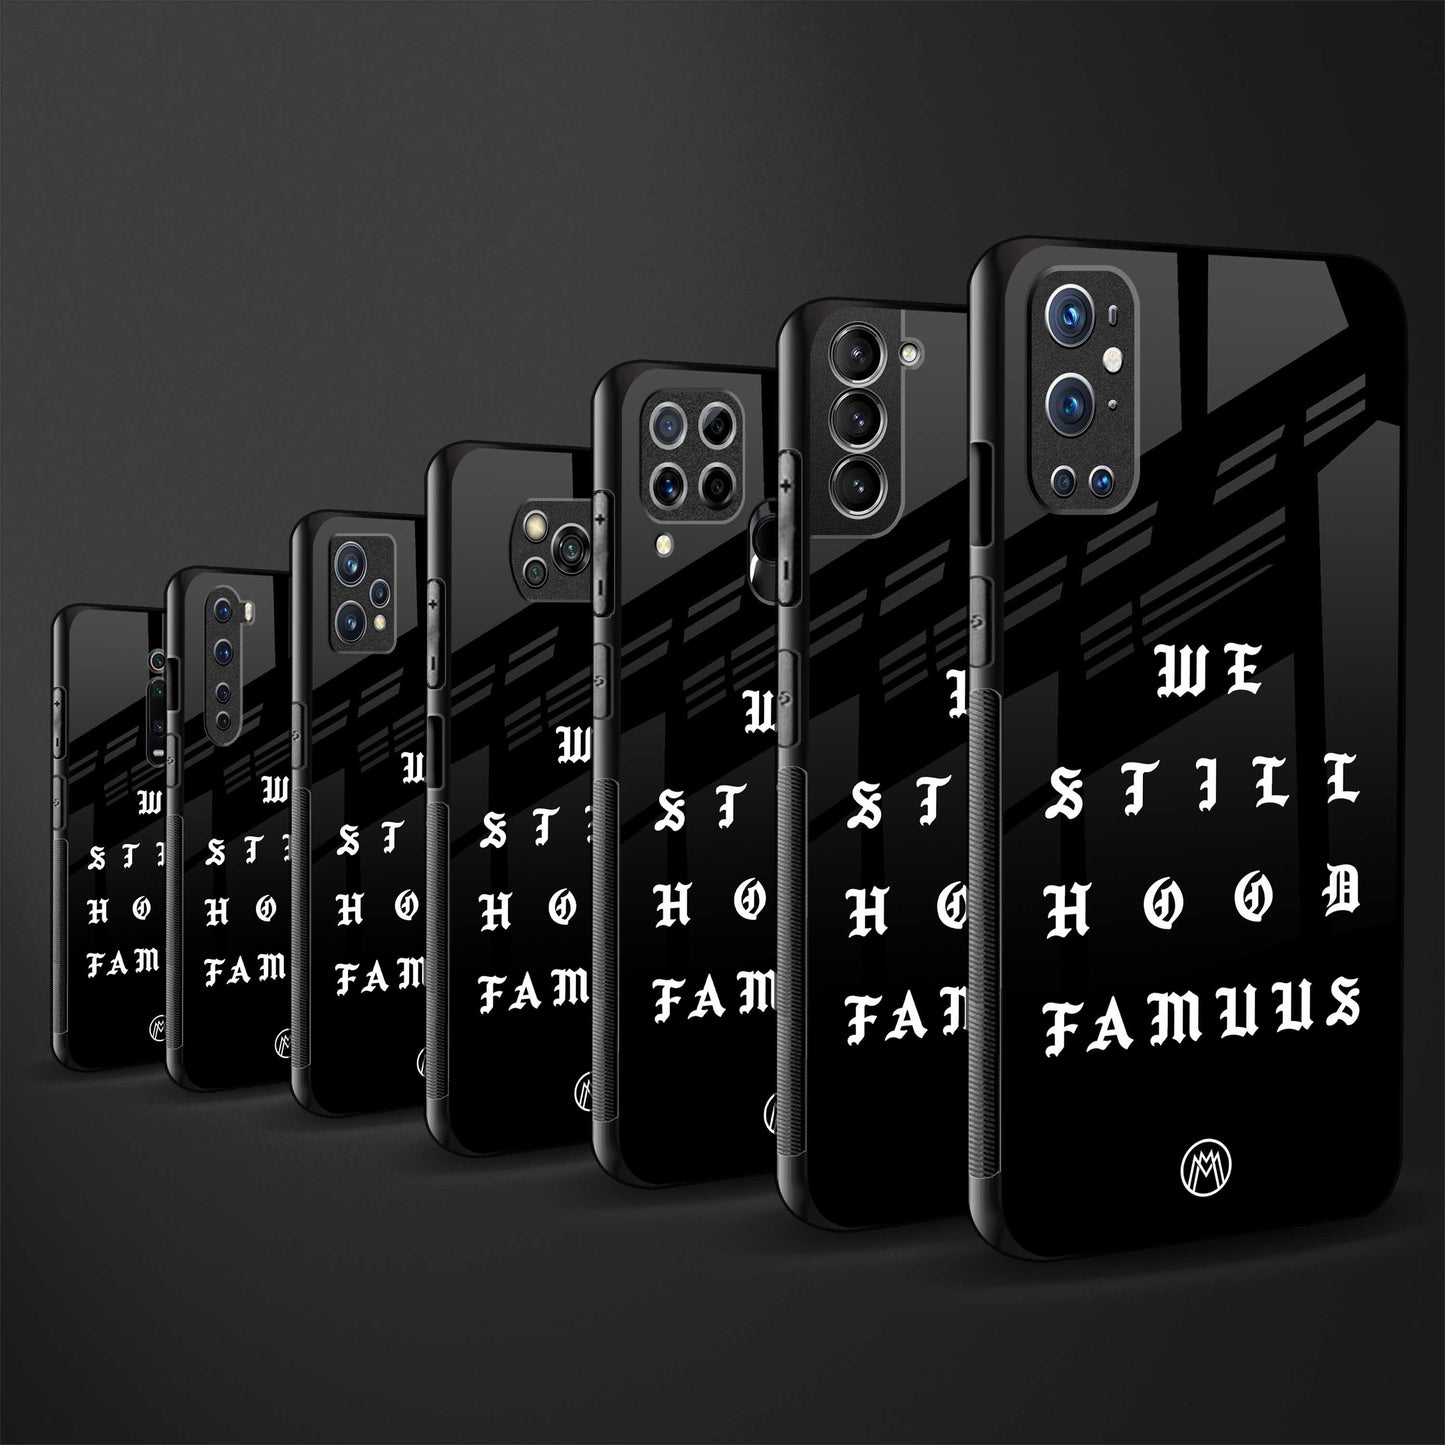 hood famous phone cover for vivo y21s